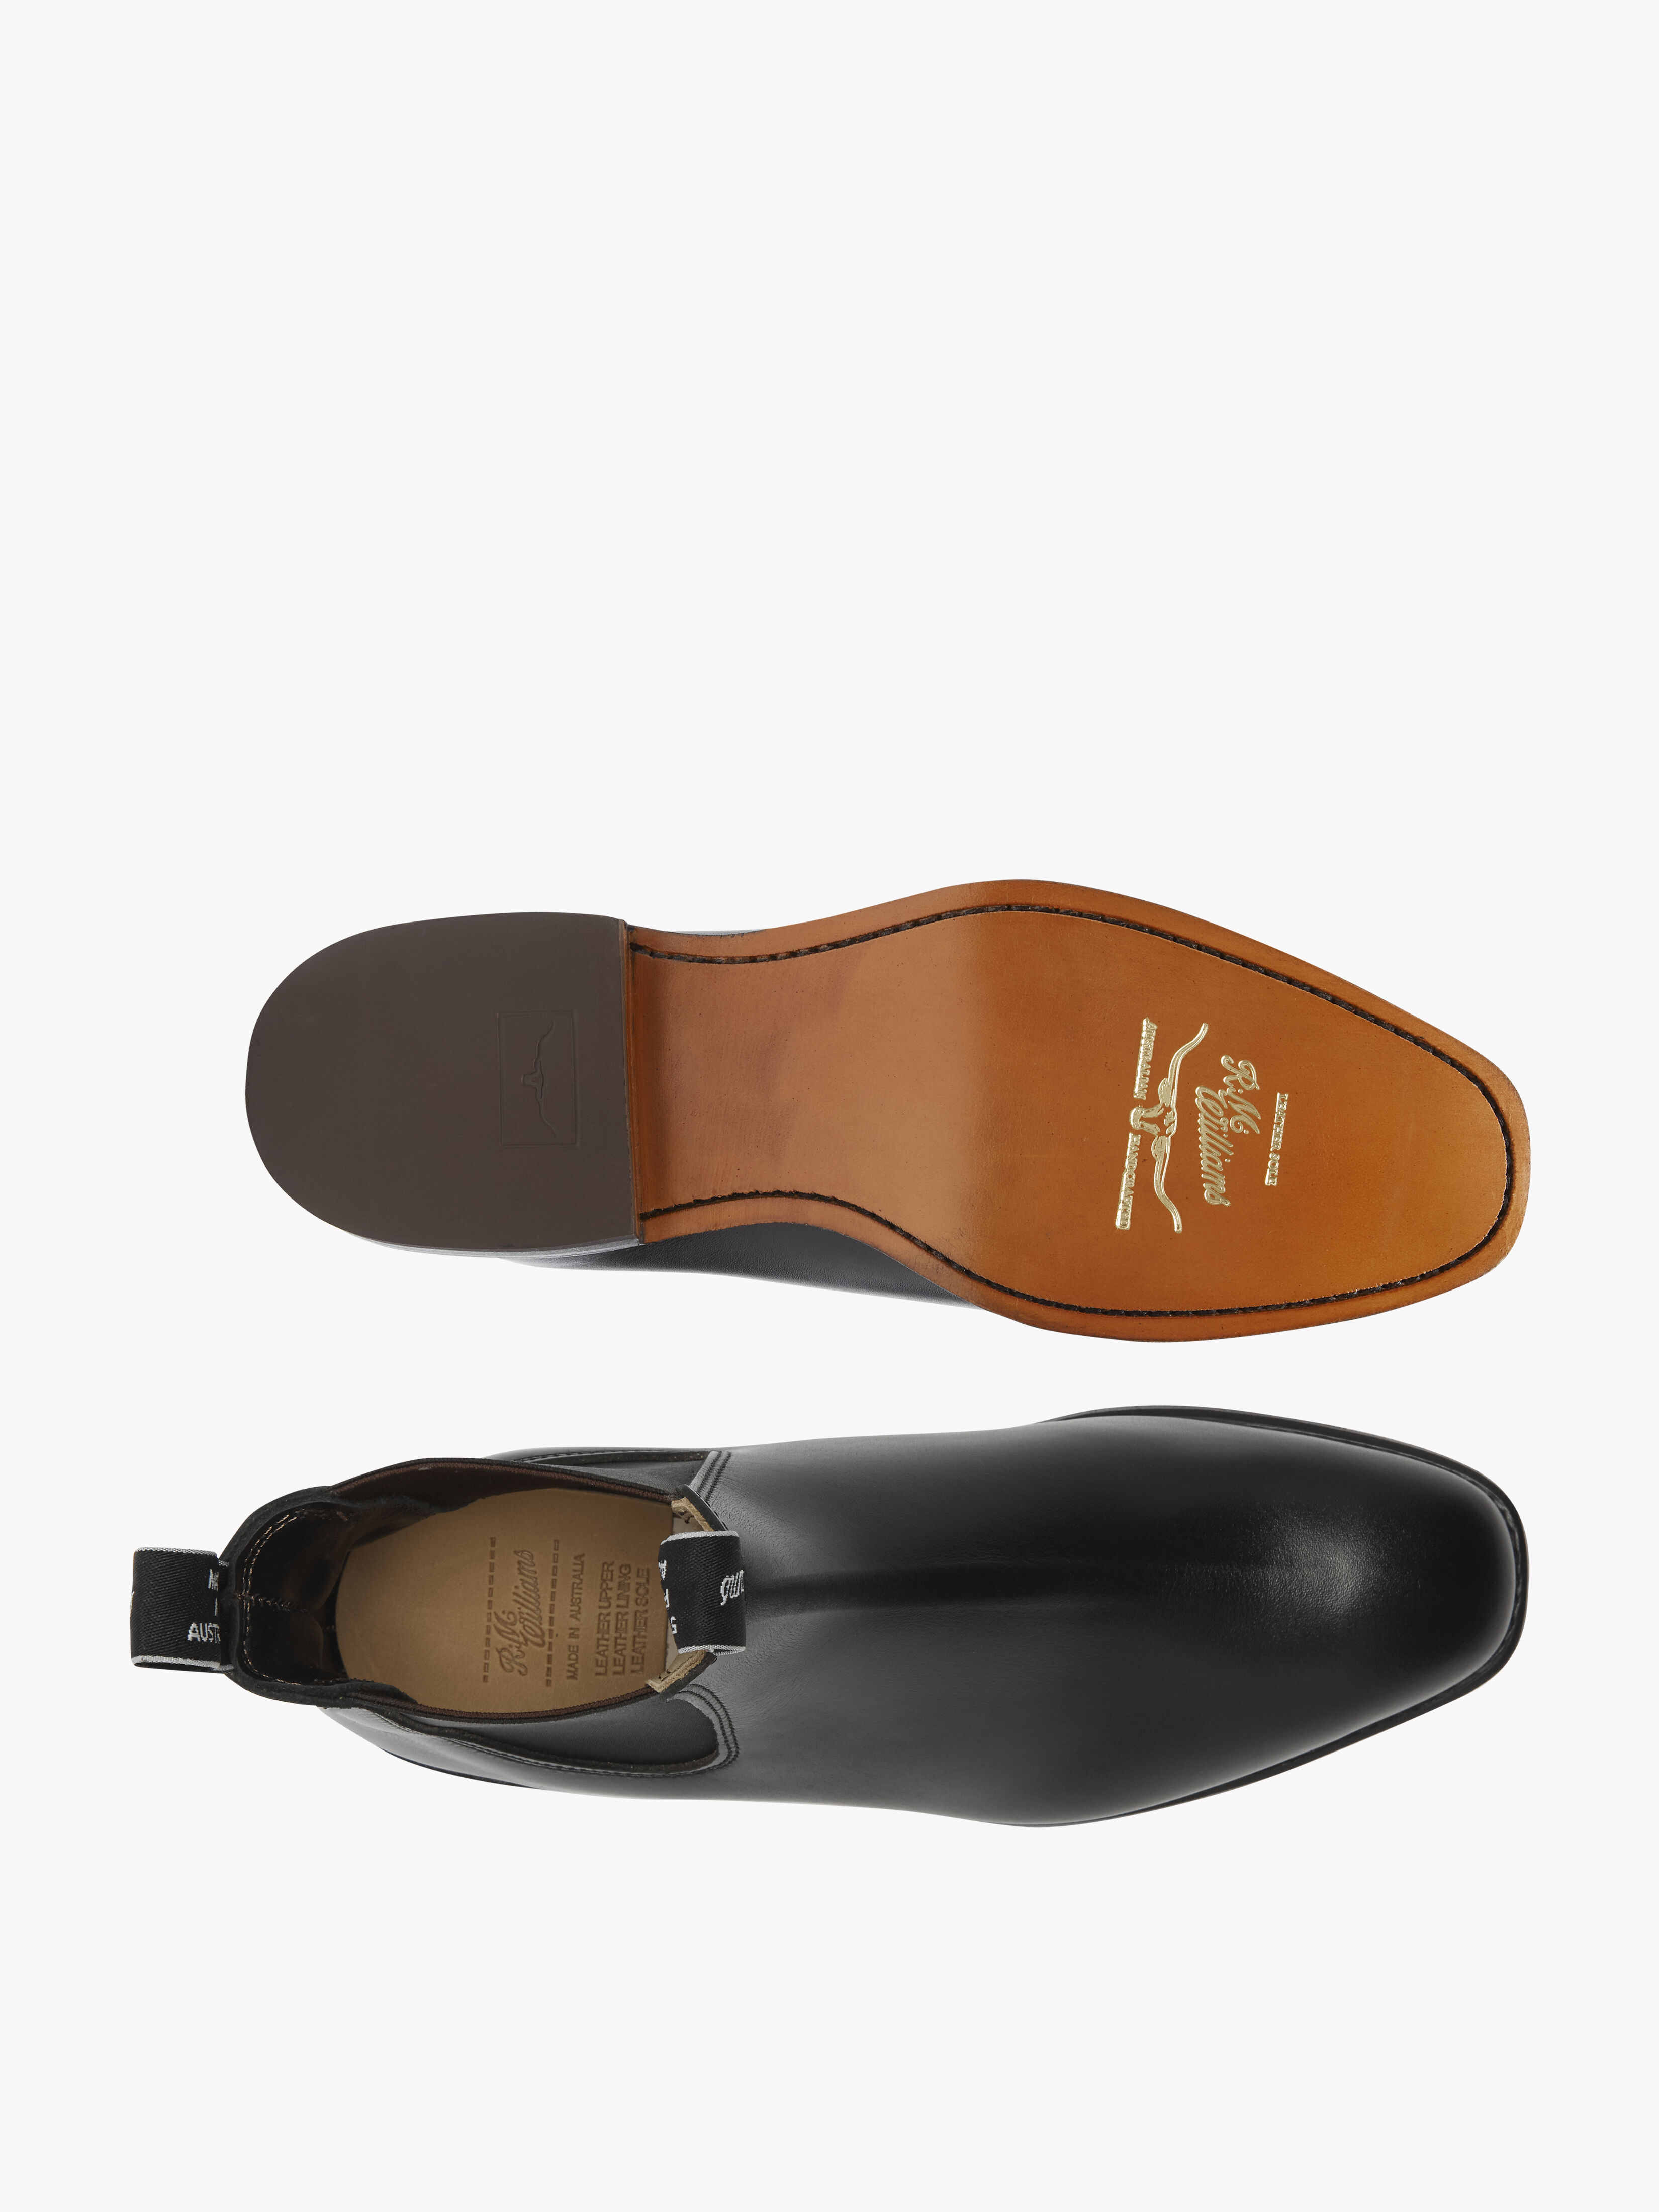 rm williams mens shoes